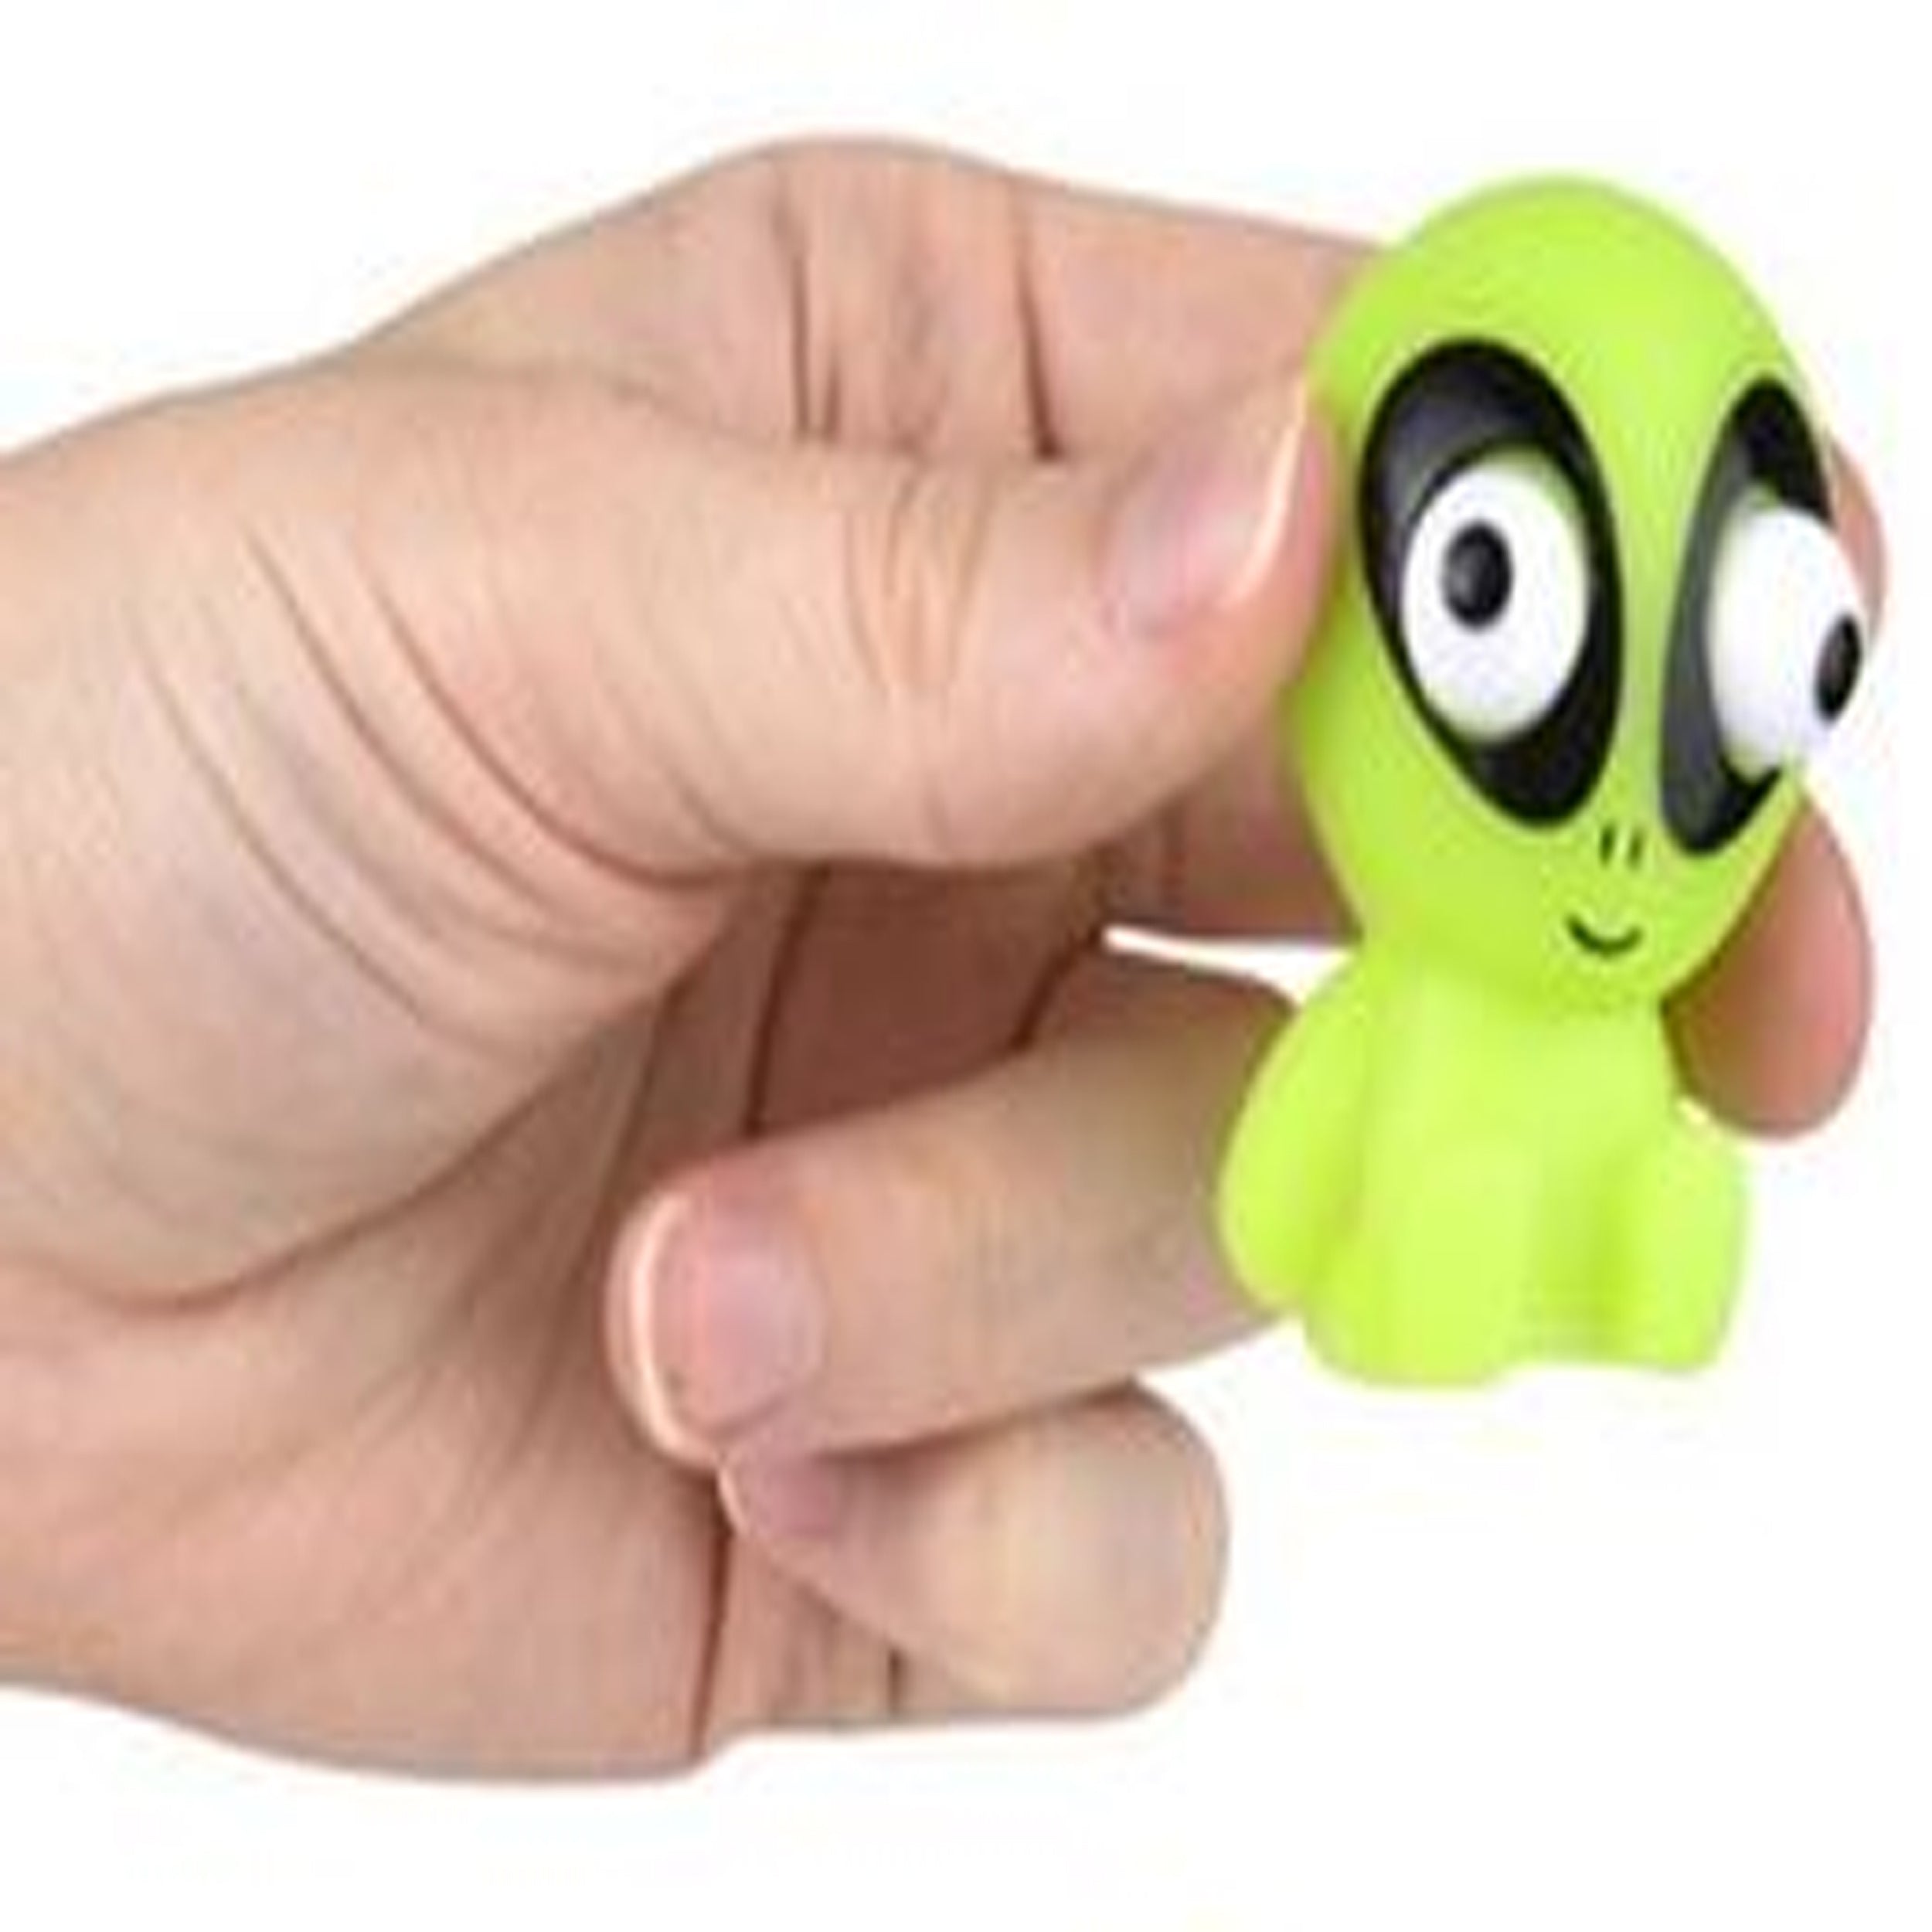 Alien Style Eye Pop Out Squishy Soft Rubber Toy for Kids - (MOQ 12 Pack)